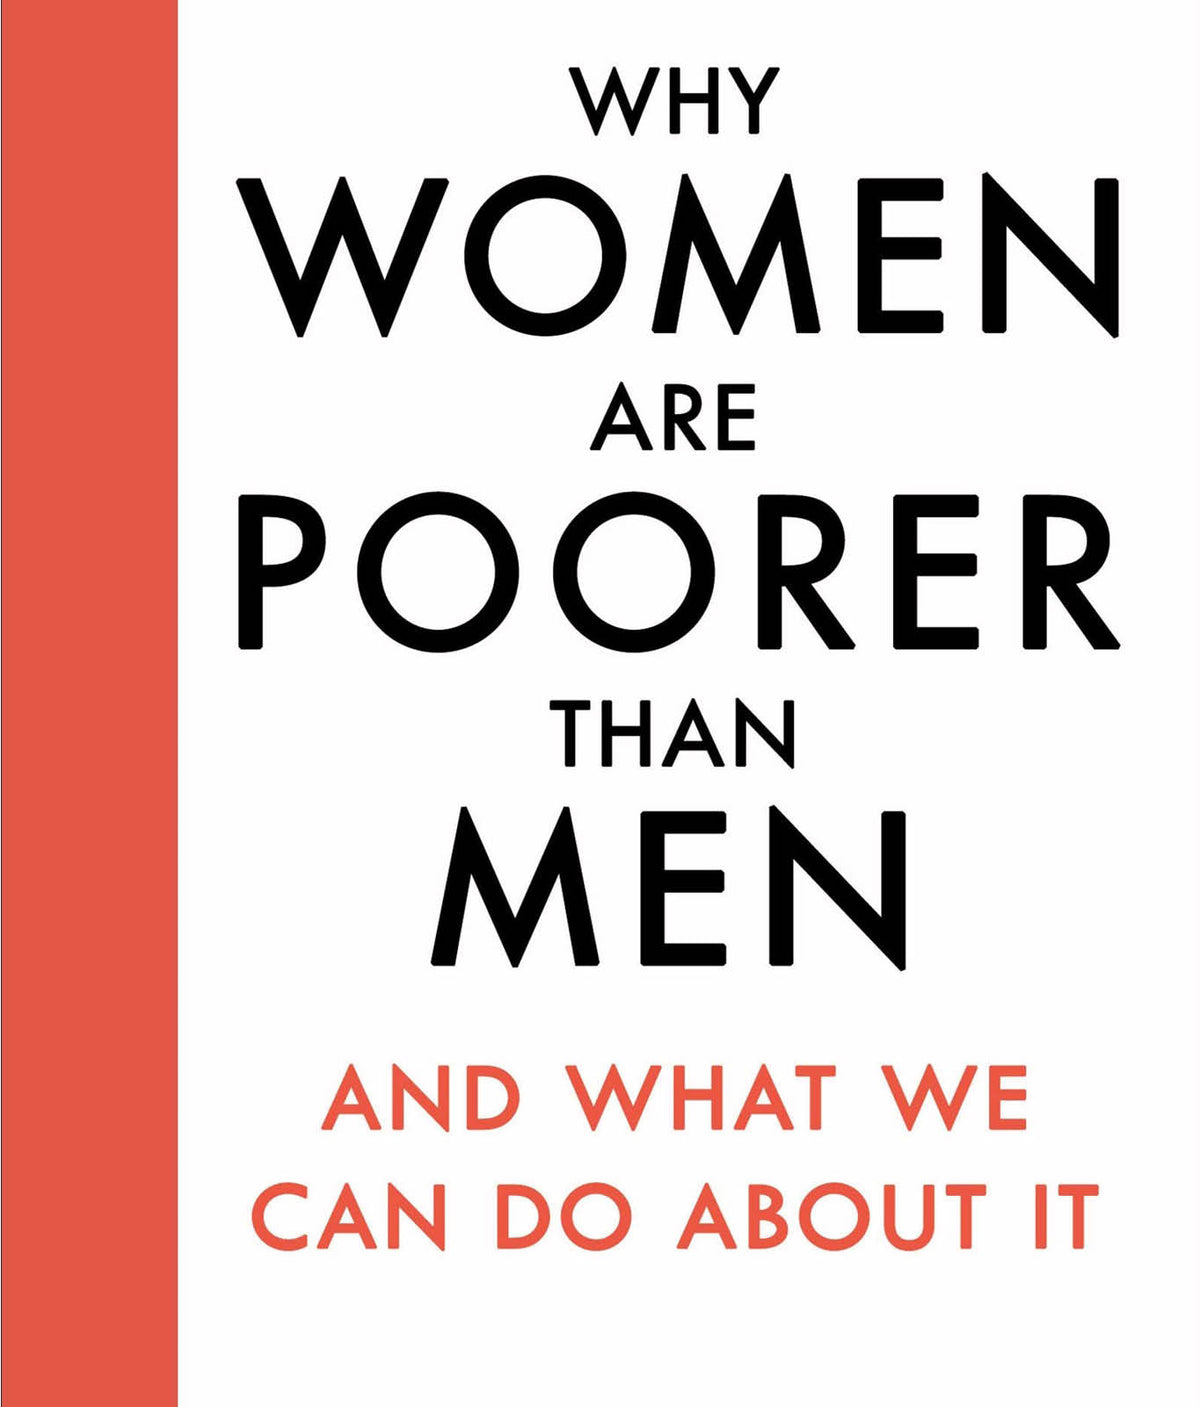 Why Women Are Poorer Than Men and What We Can Do About It by Annabelle Williams